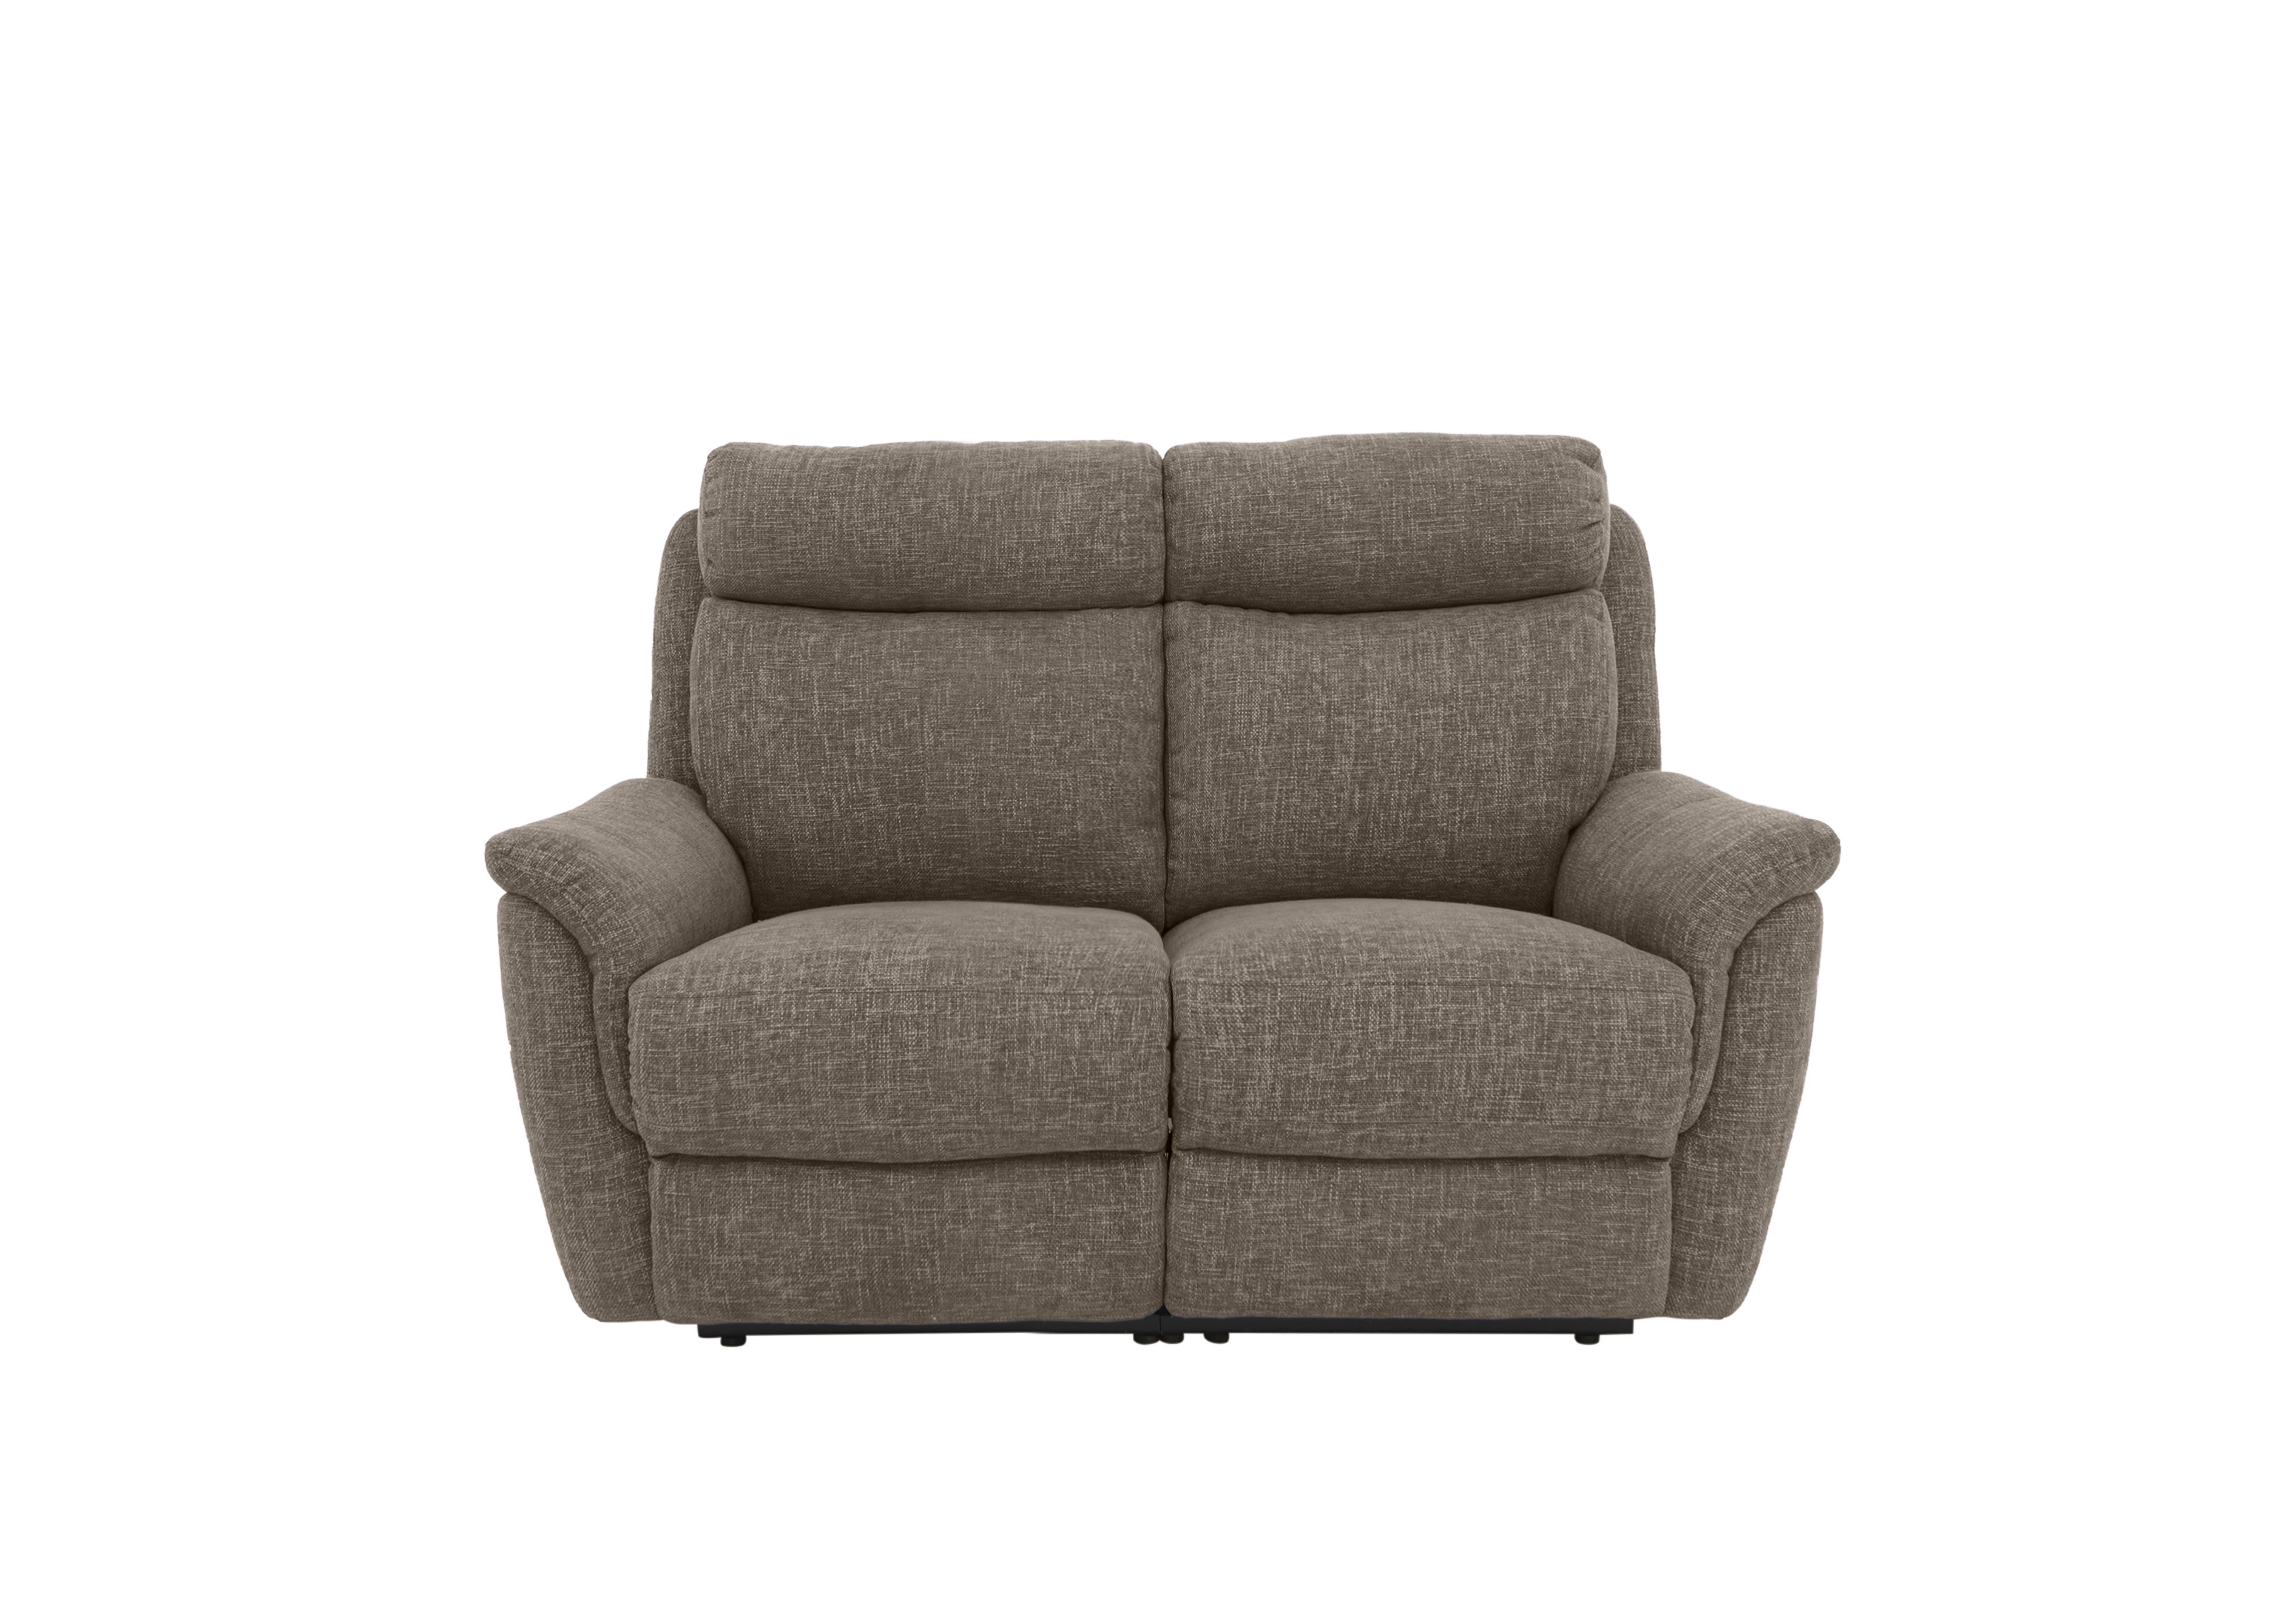 Orlando 2 Seater Fabric Power Recliner Sofa with Power Headrests and Lumbar Support in Anivia Brown 15445 on Furniture Village